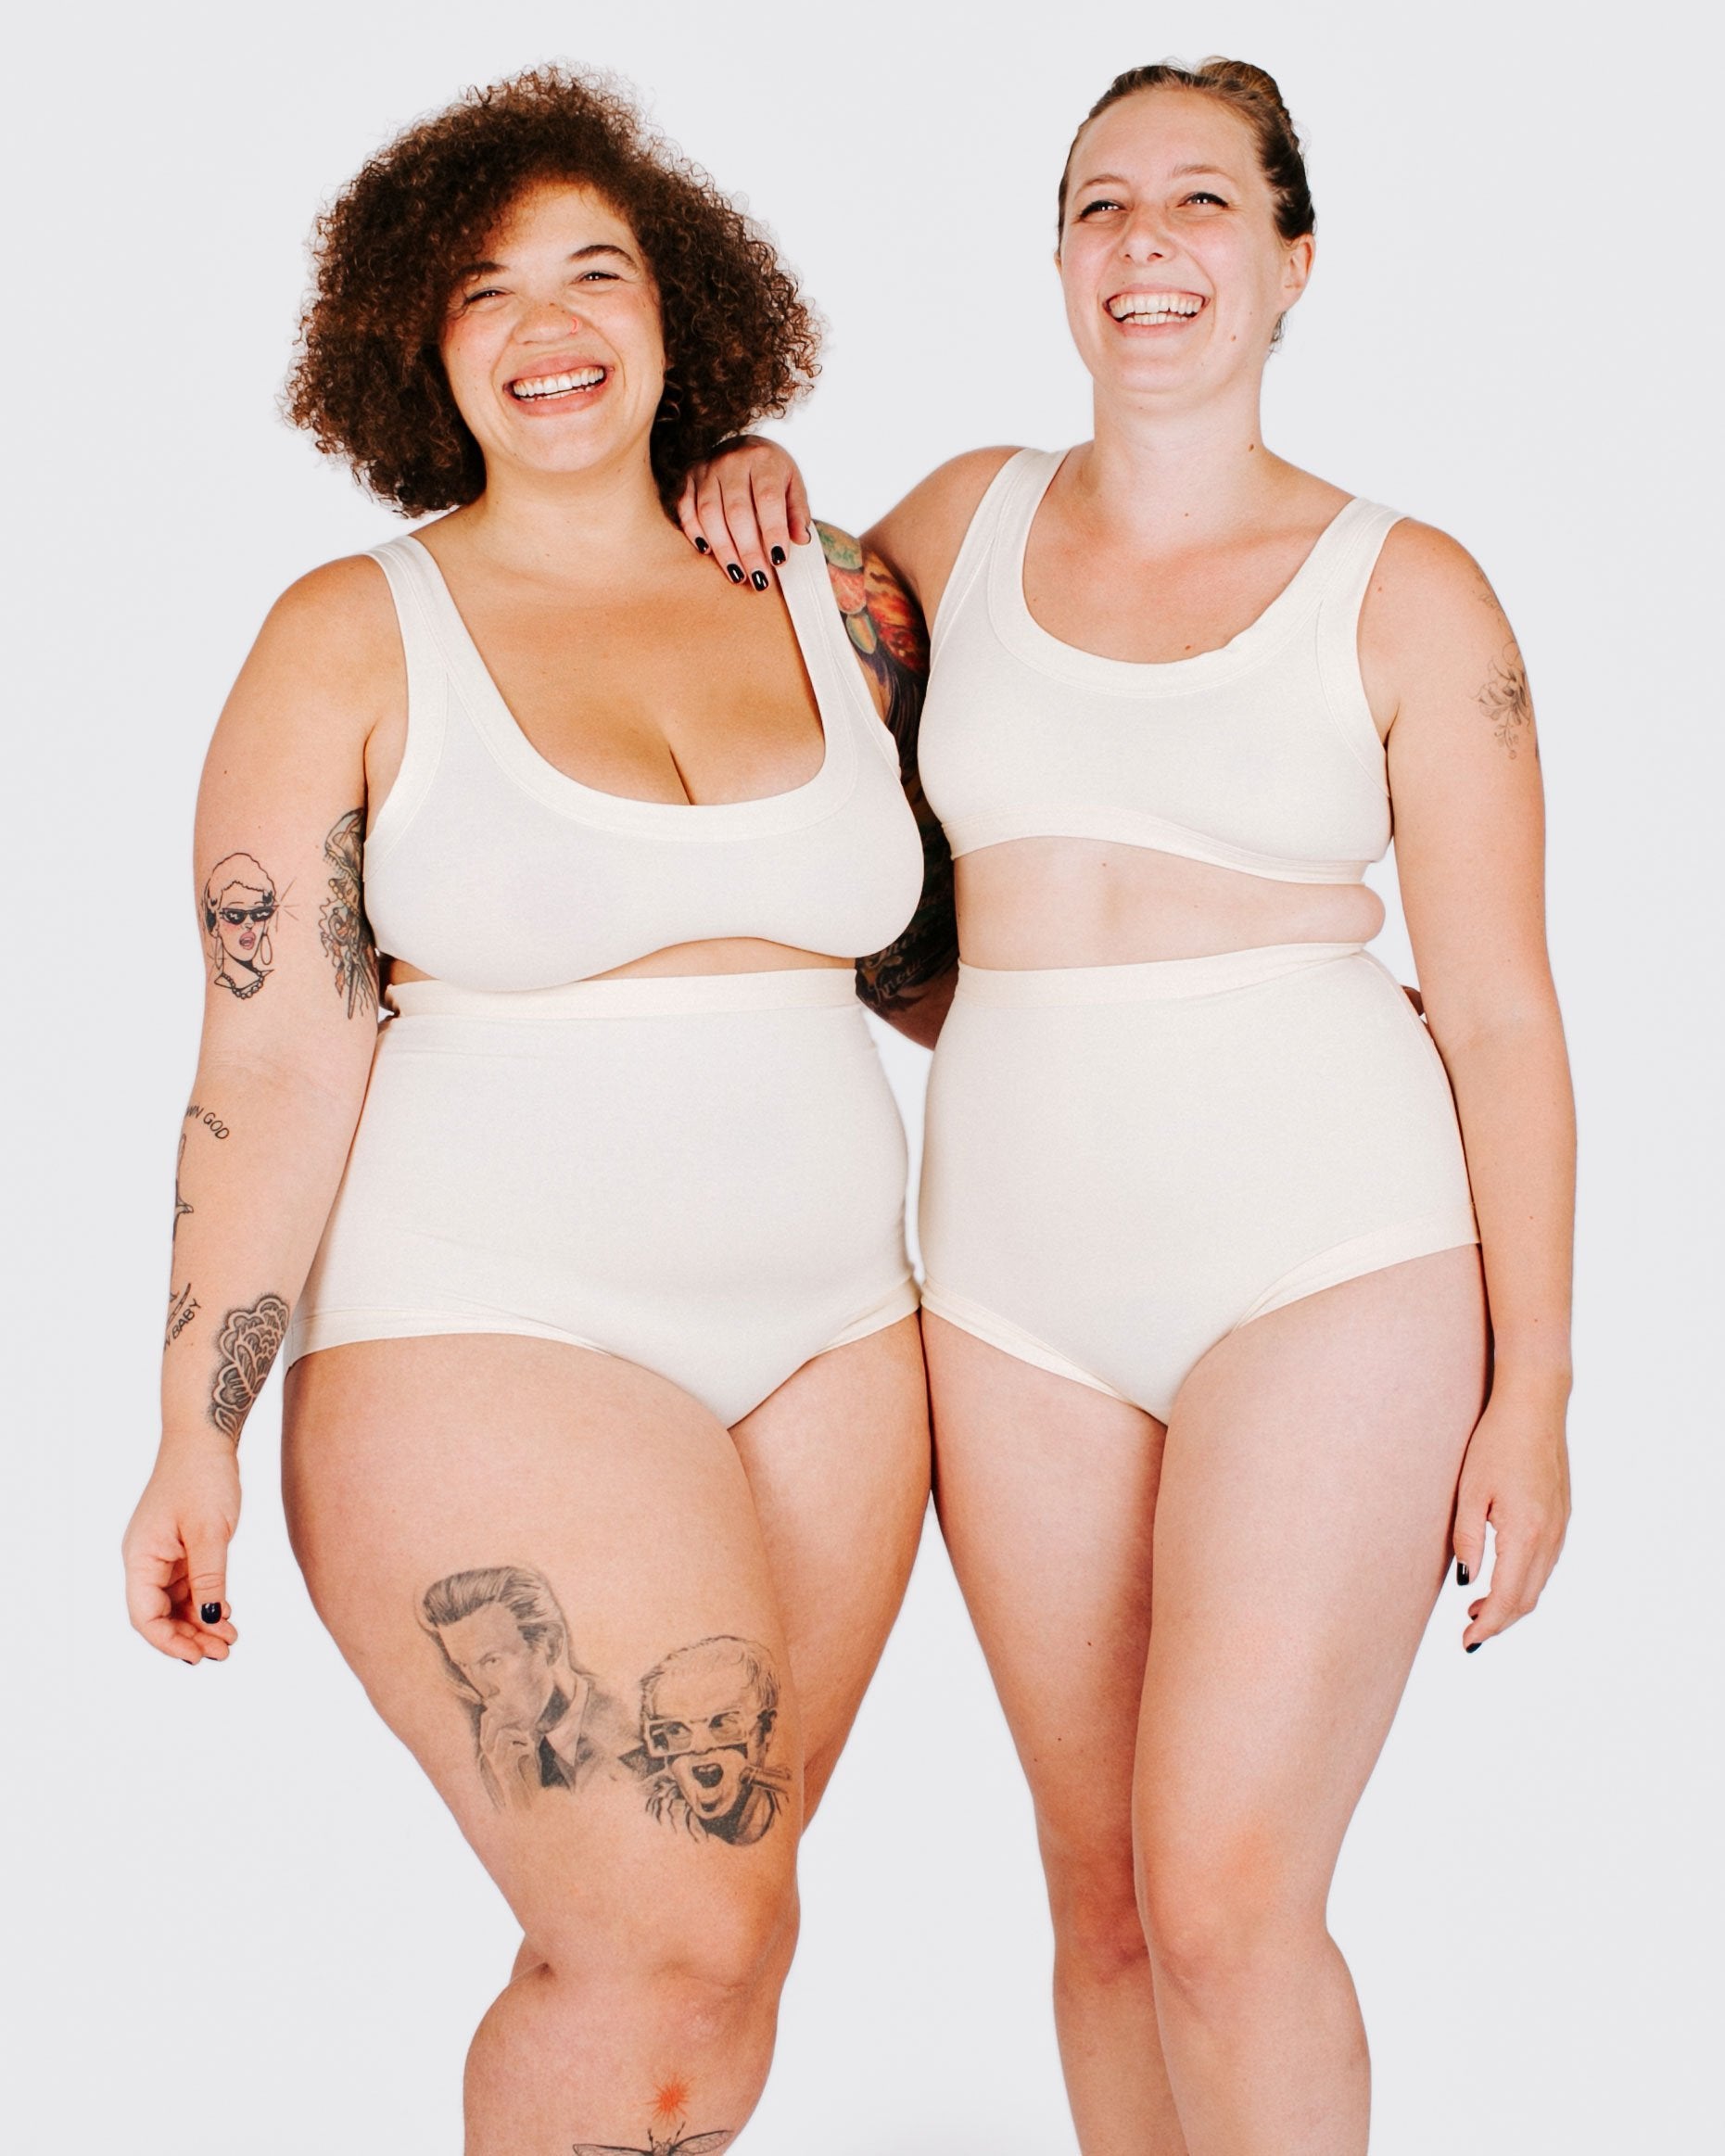 Fit photo from the front of Thunderpants organic cotton Sky Rise style underwear and Bralette in off-white on two model standing together.